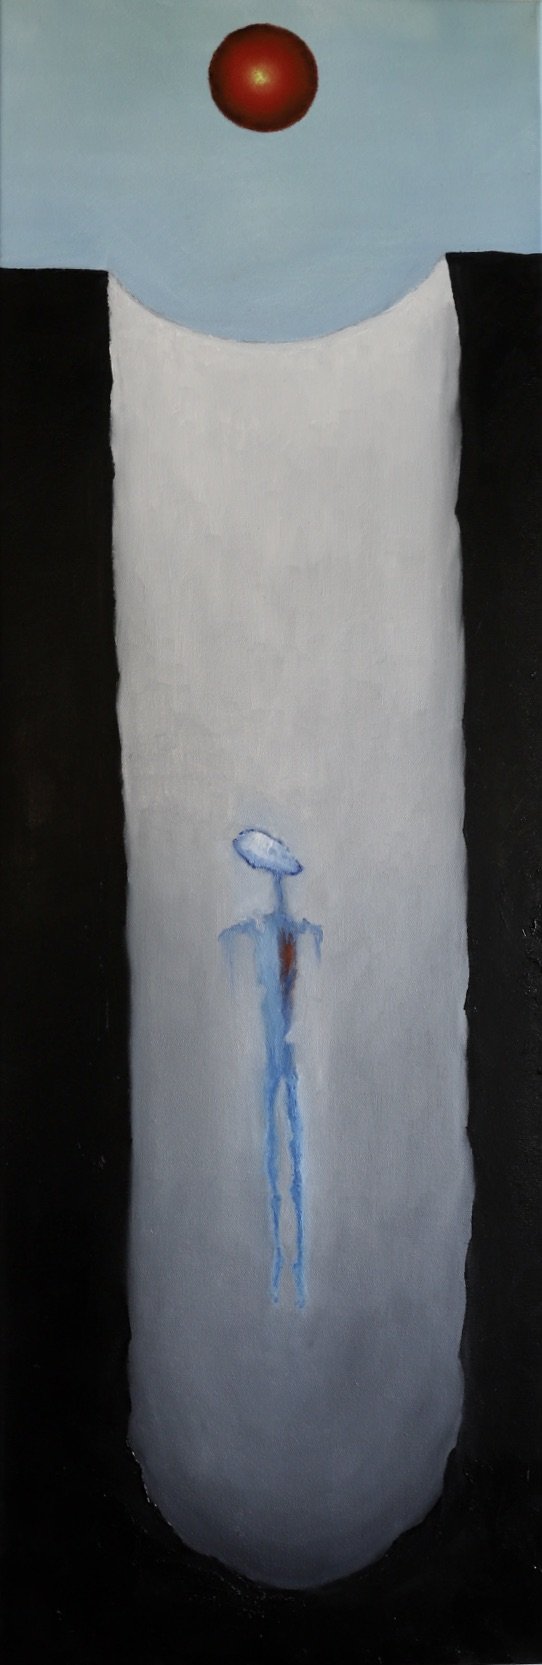 THE BELIEVER - oil on canvas 12 x 24" (30.48 x 60.96cm) $700 US + shipping